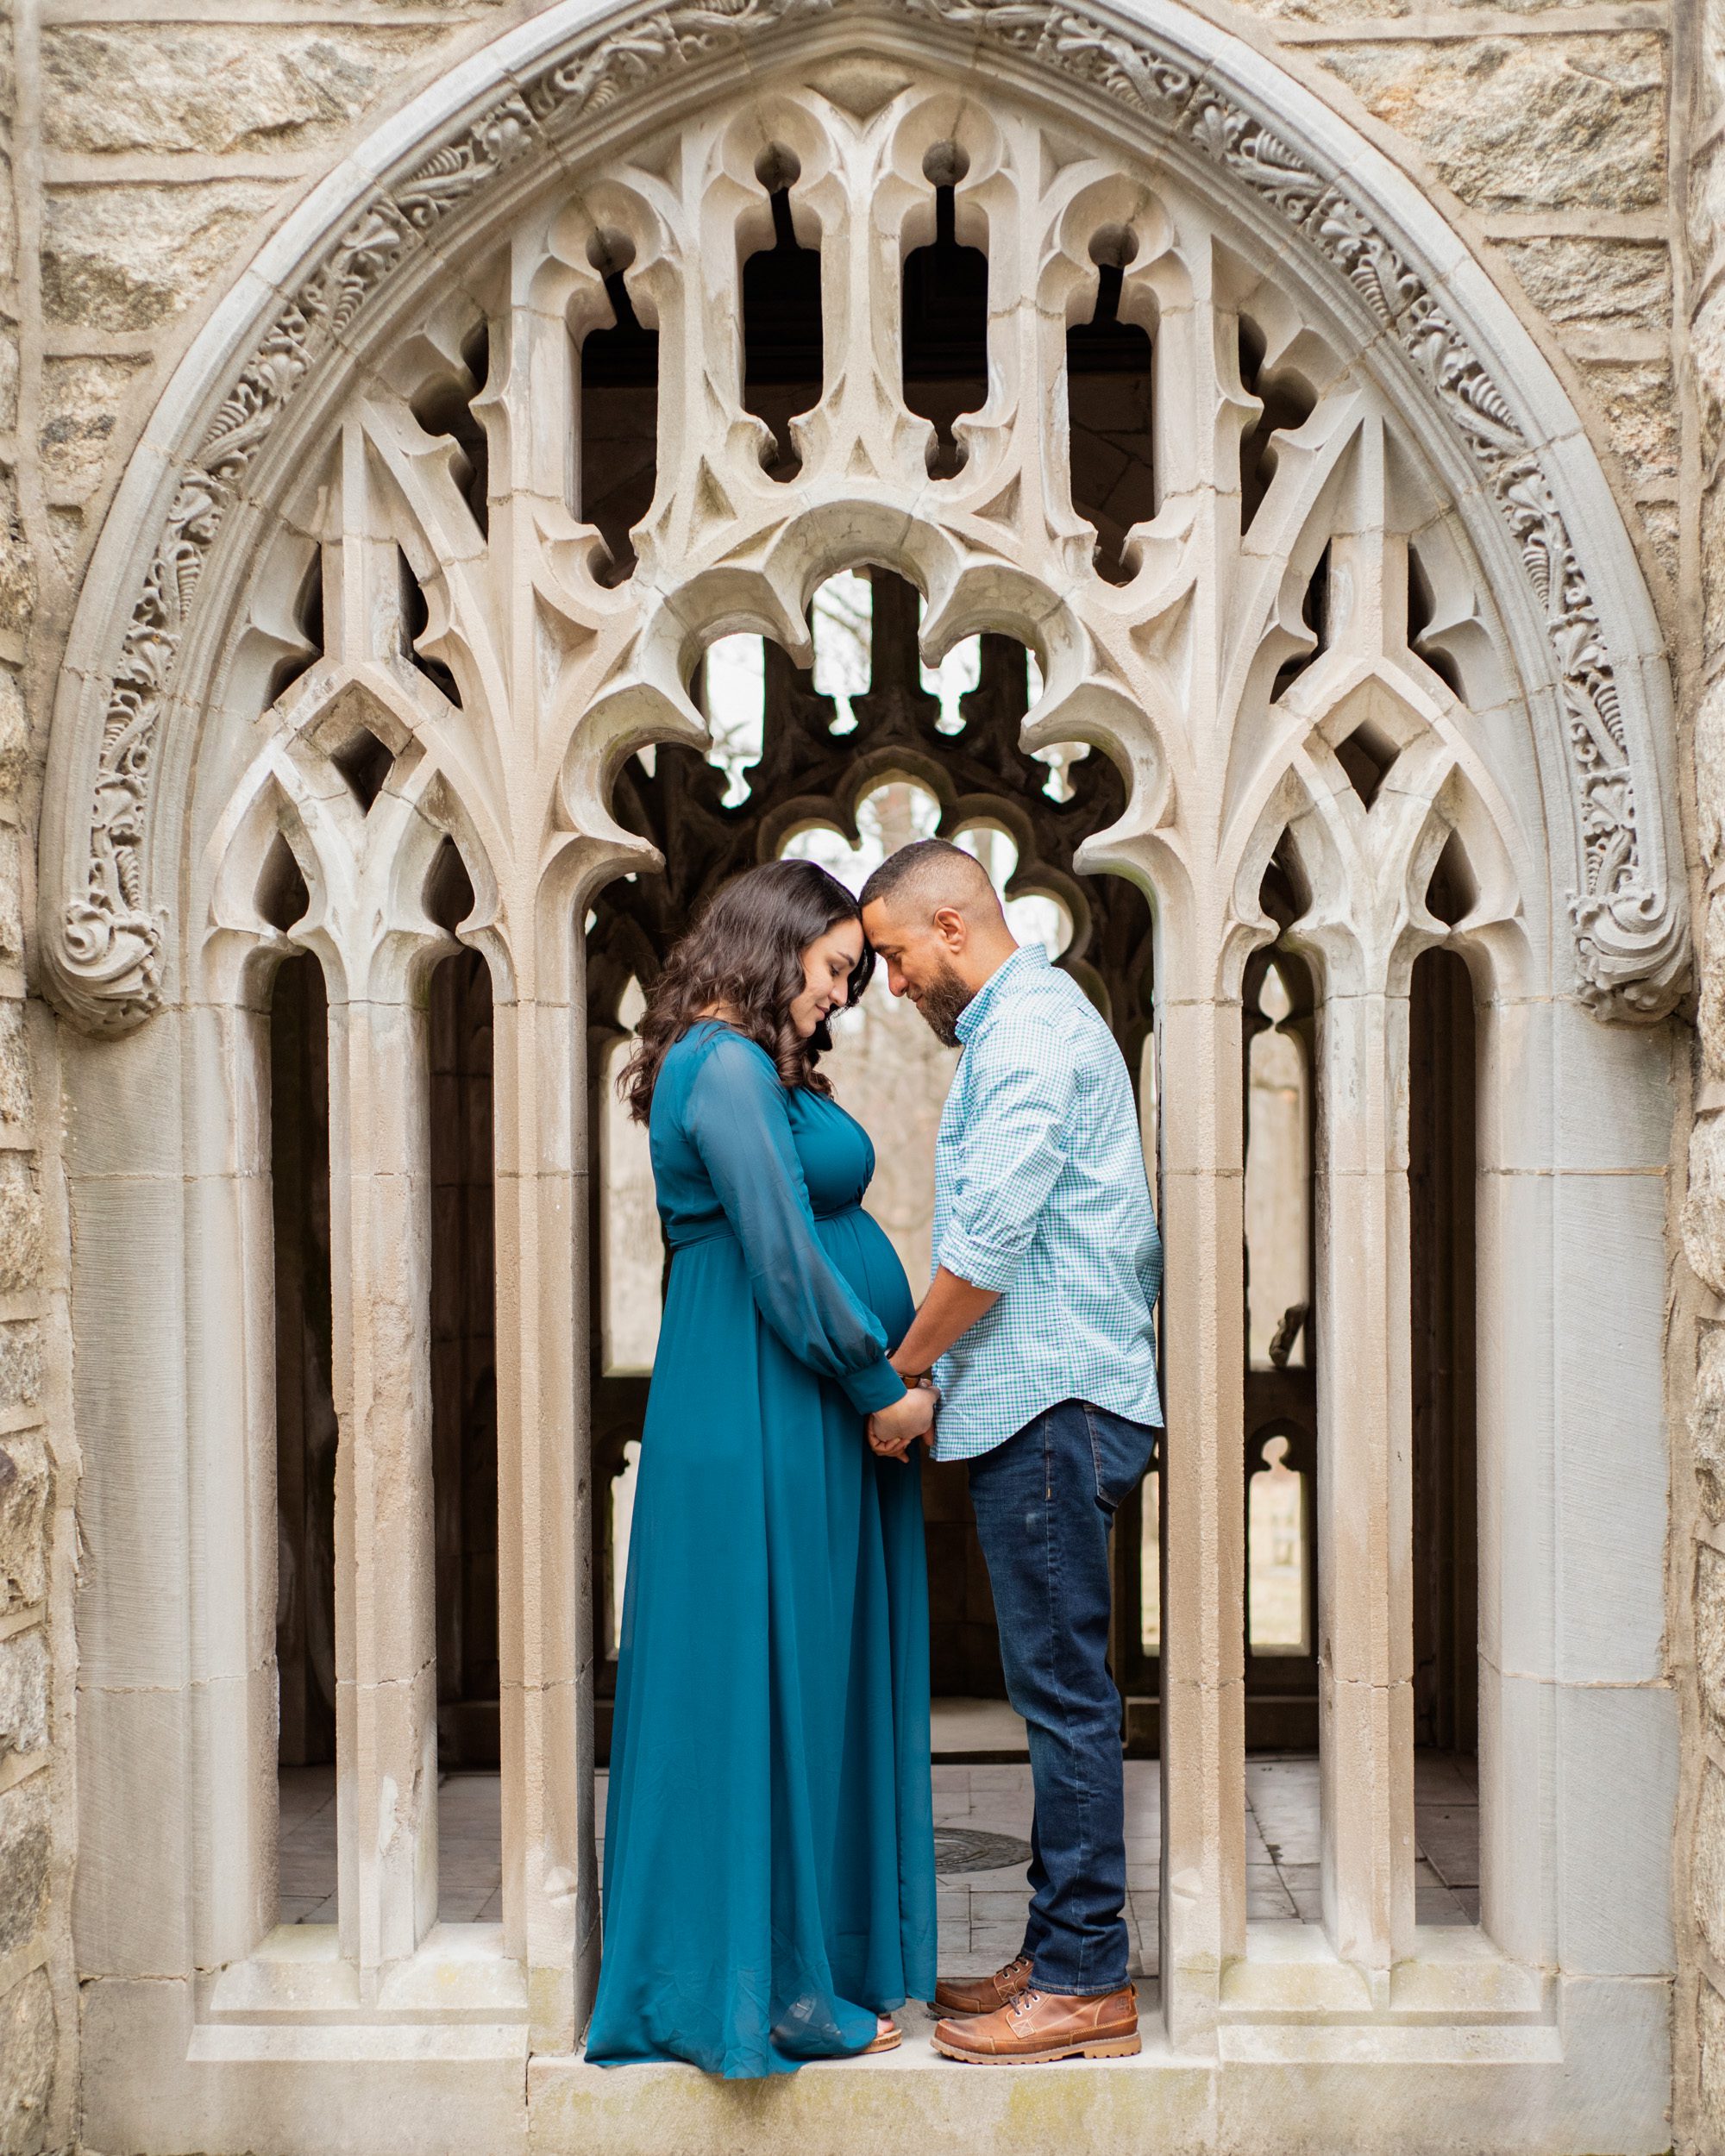 expecting parents resting their foreheads together and holding hands under a stone archway at a maternity photoshoot